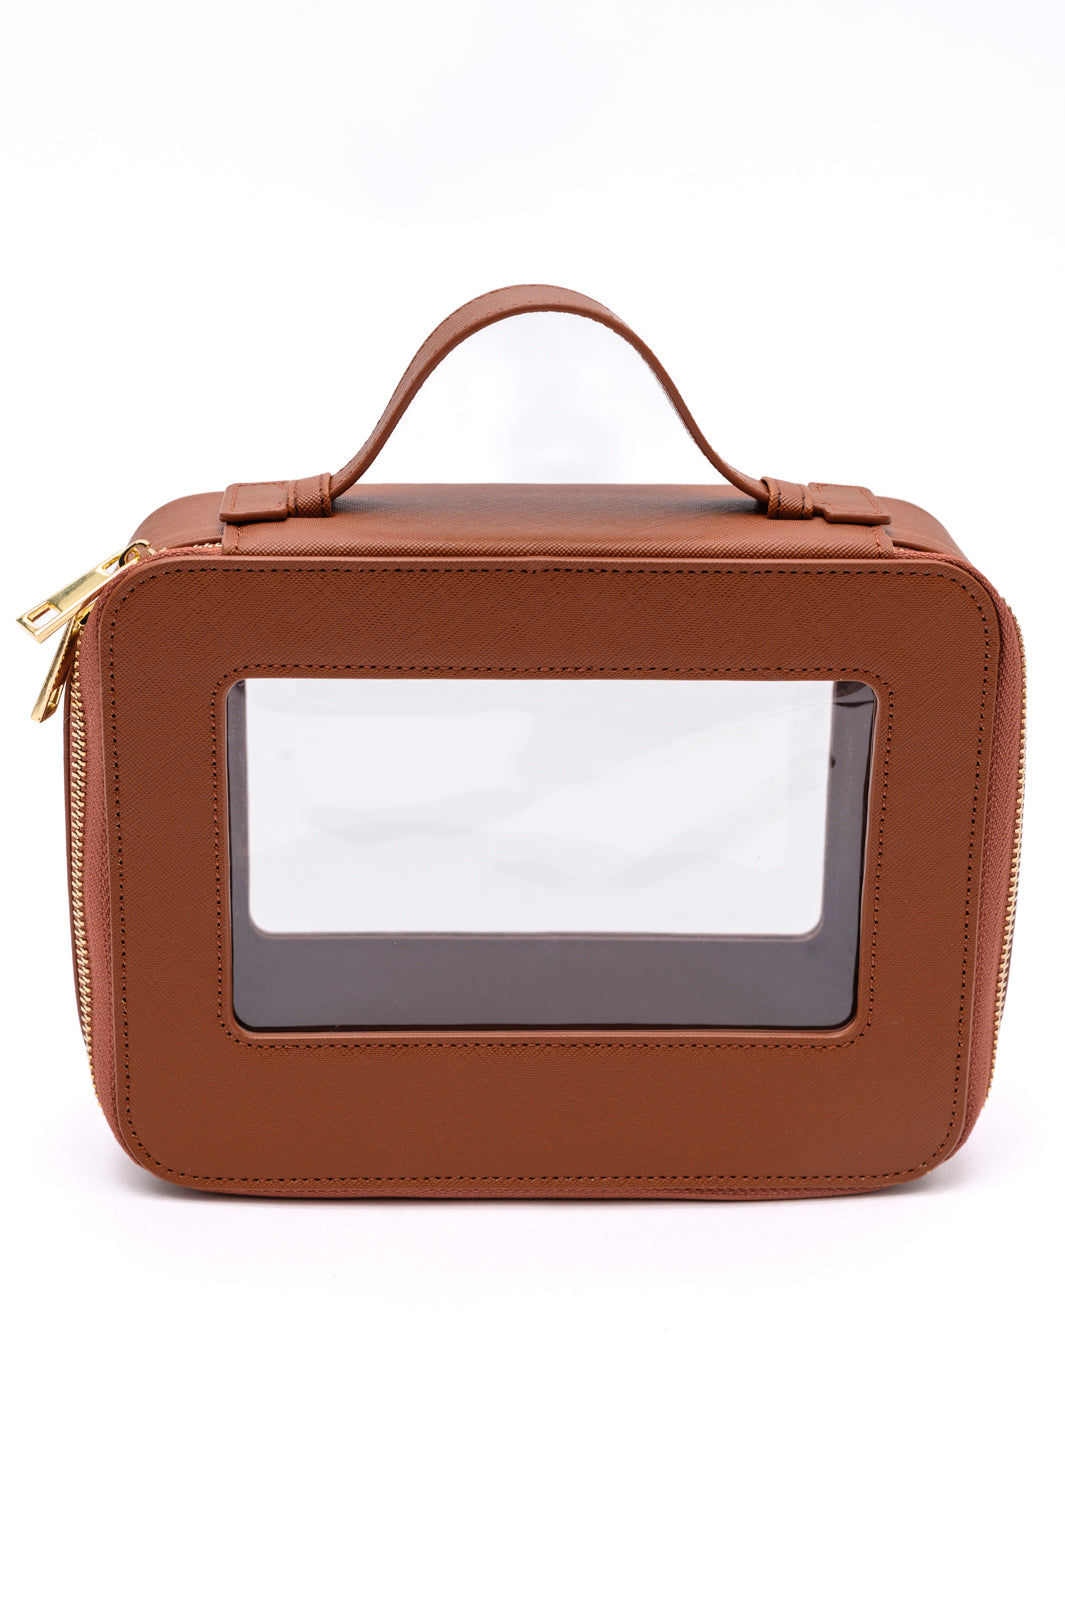 PU Leather Travel Cosmetic Case in Camel ~ Online Exclusive